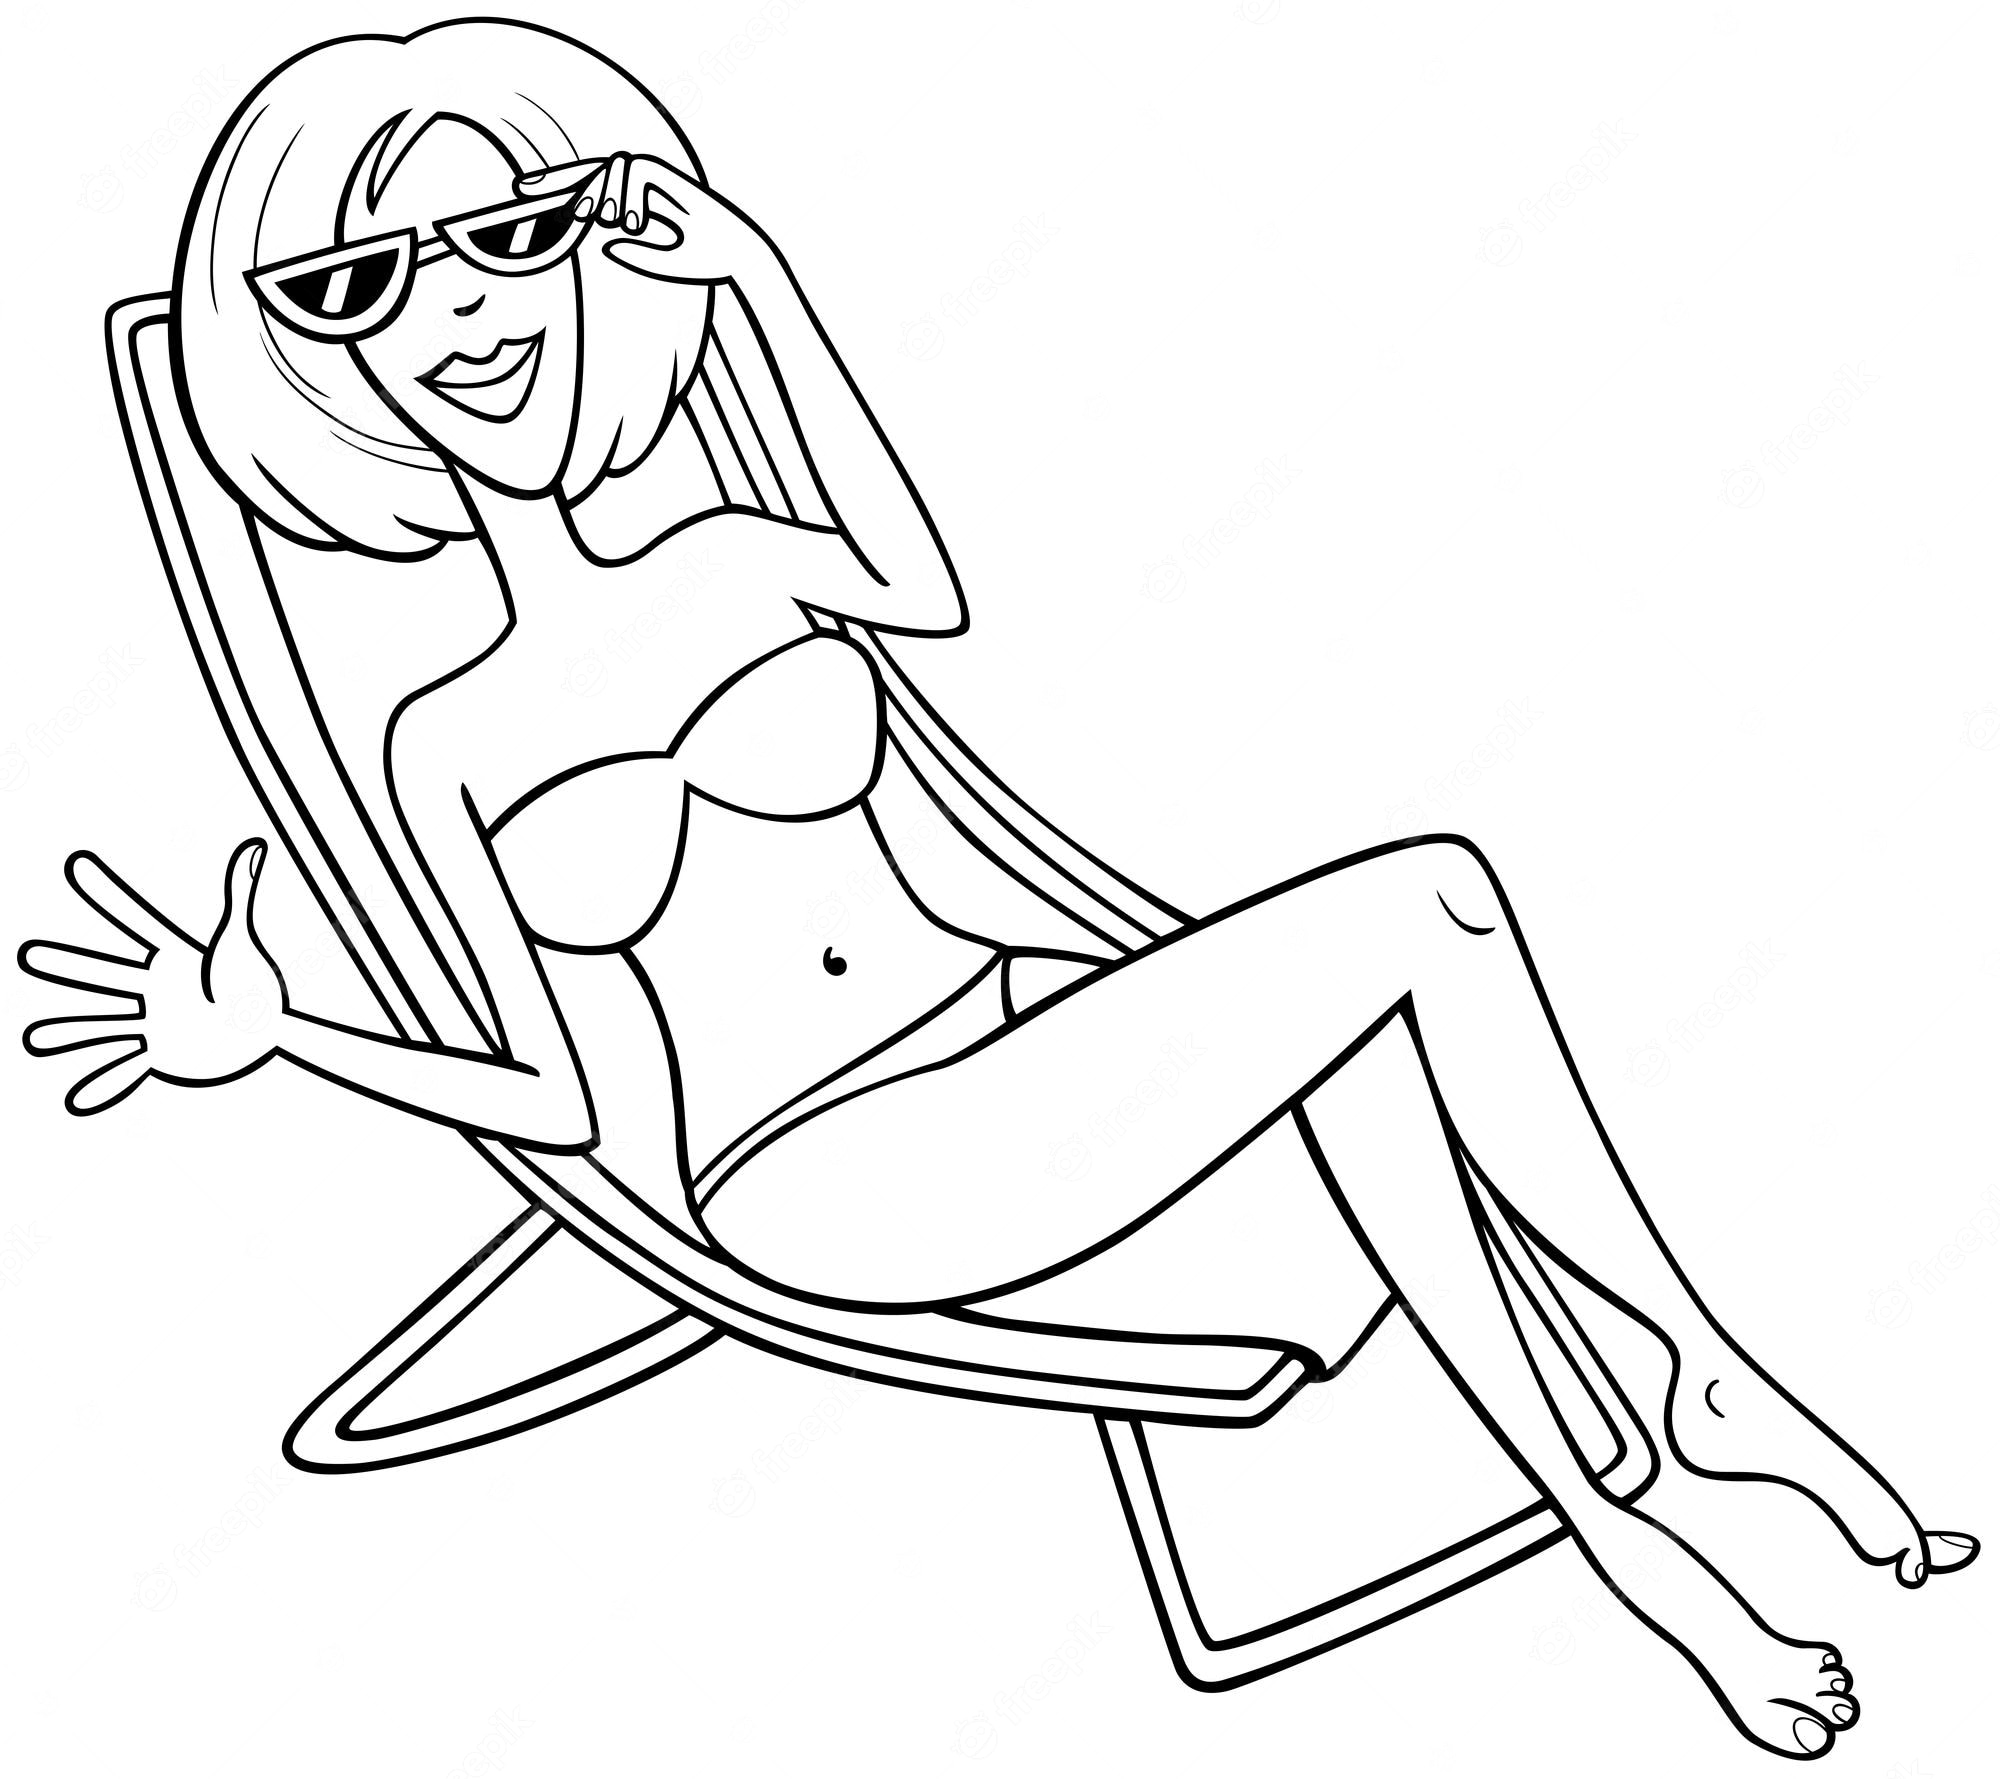 Premium Vector | Cartoon woman character on a beach chair coloring page